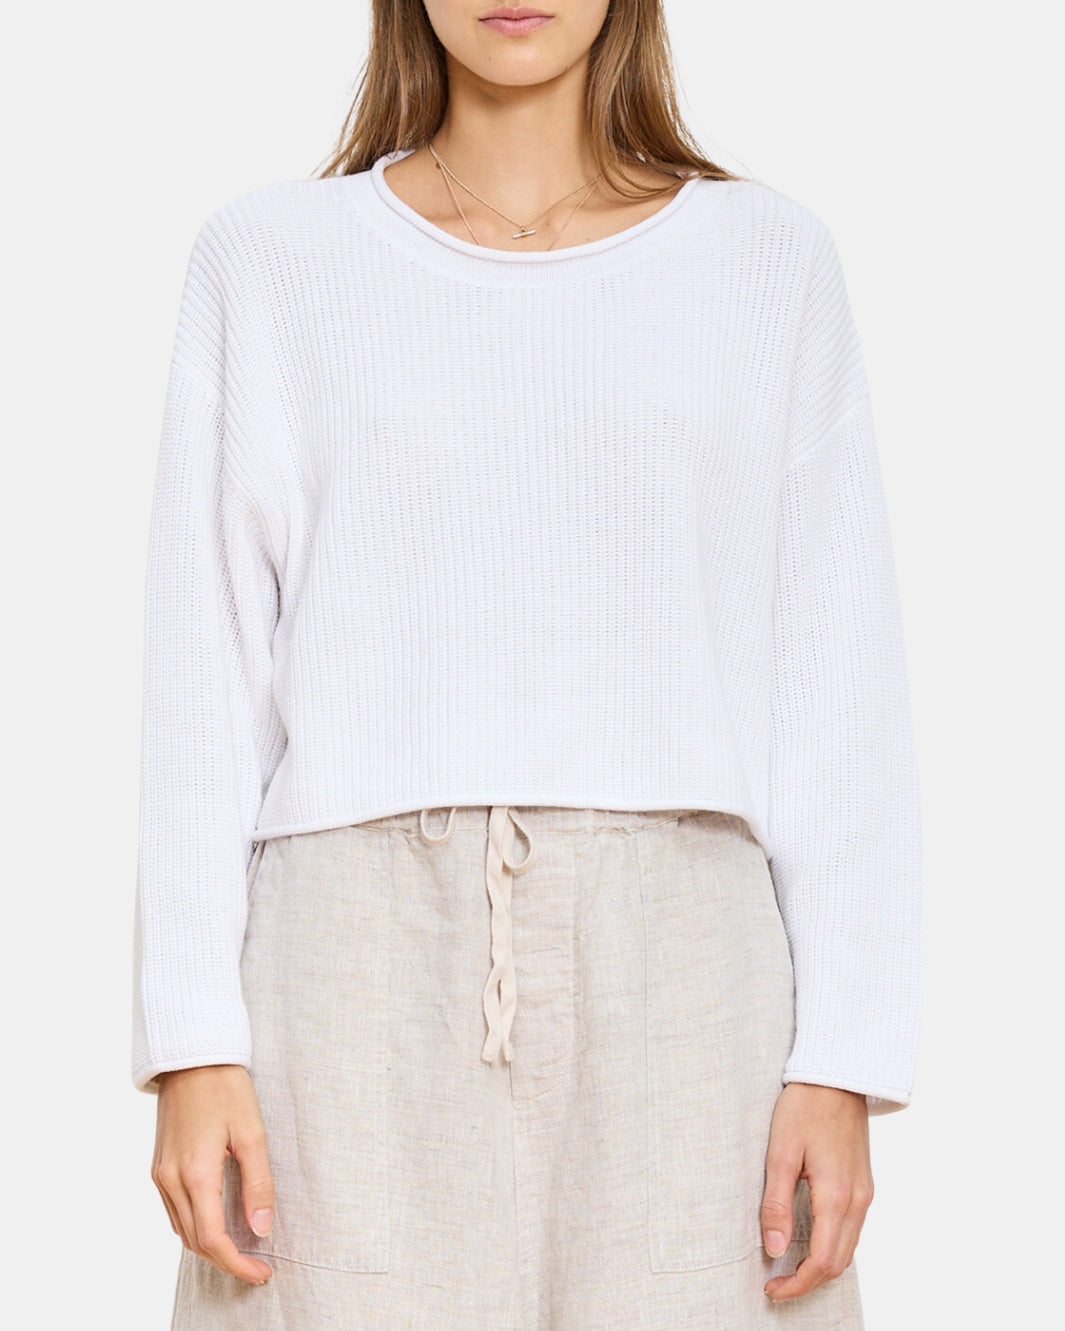 CROPPED RELAXED SWEATER IN WHITE - Romi Boutique